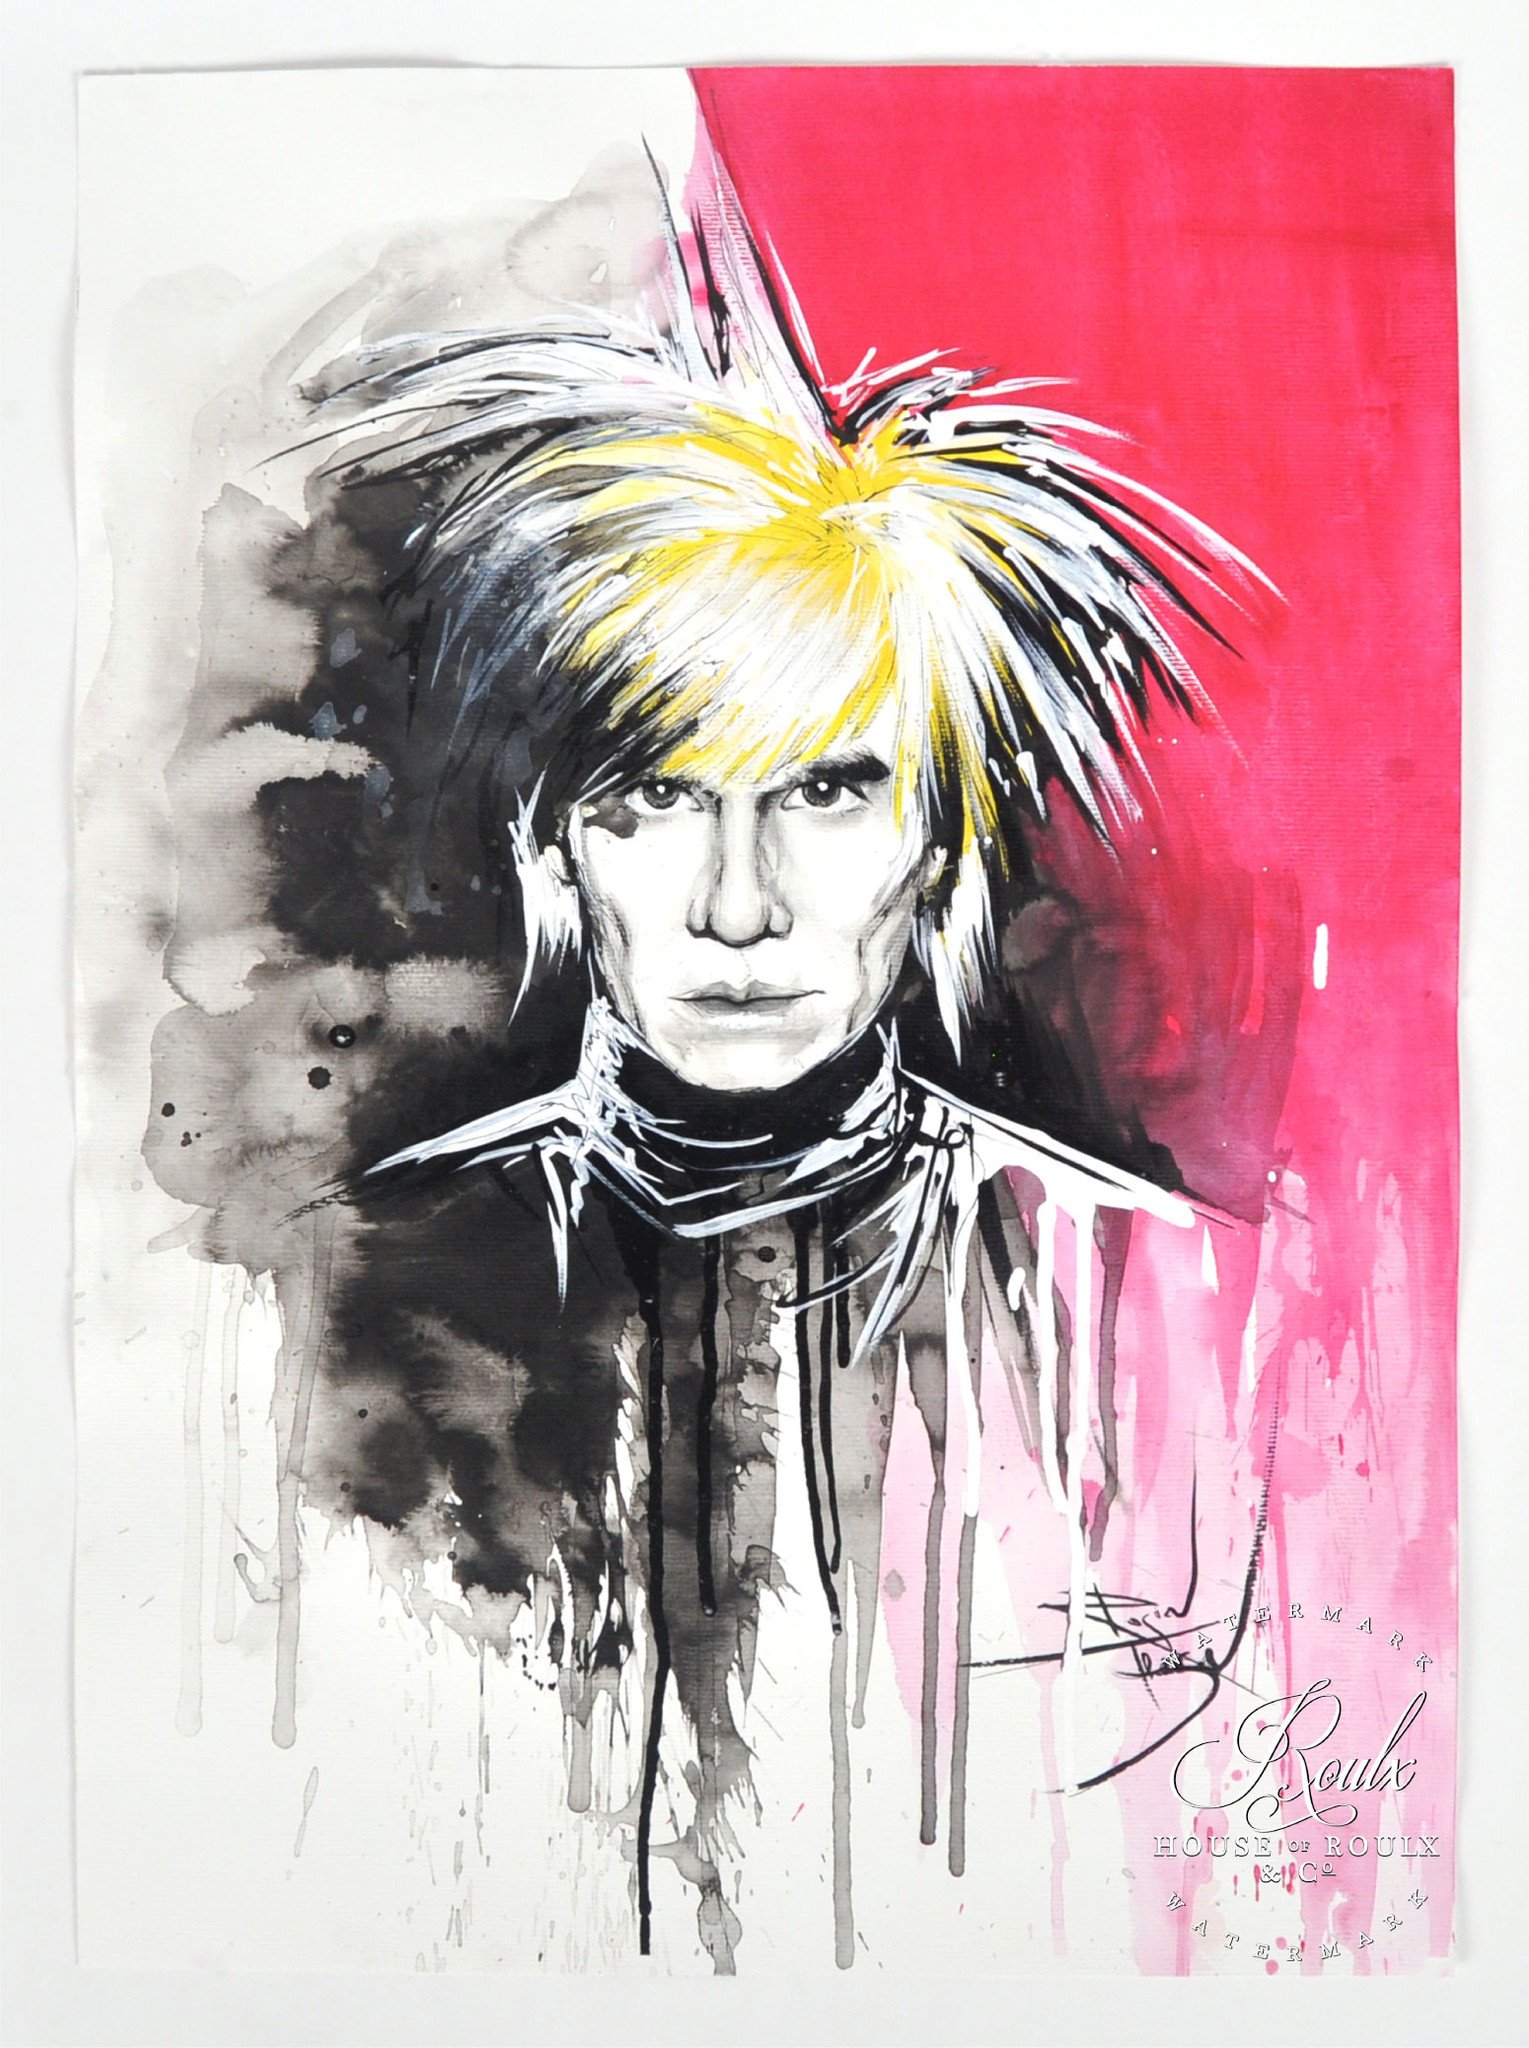 1529x2048 Andy Warhol By Rosier - Andy Warhol Watercolor.